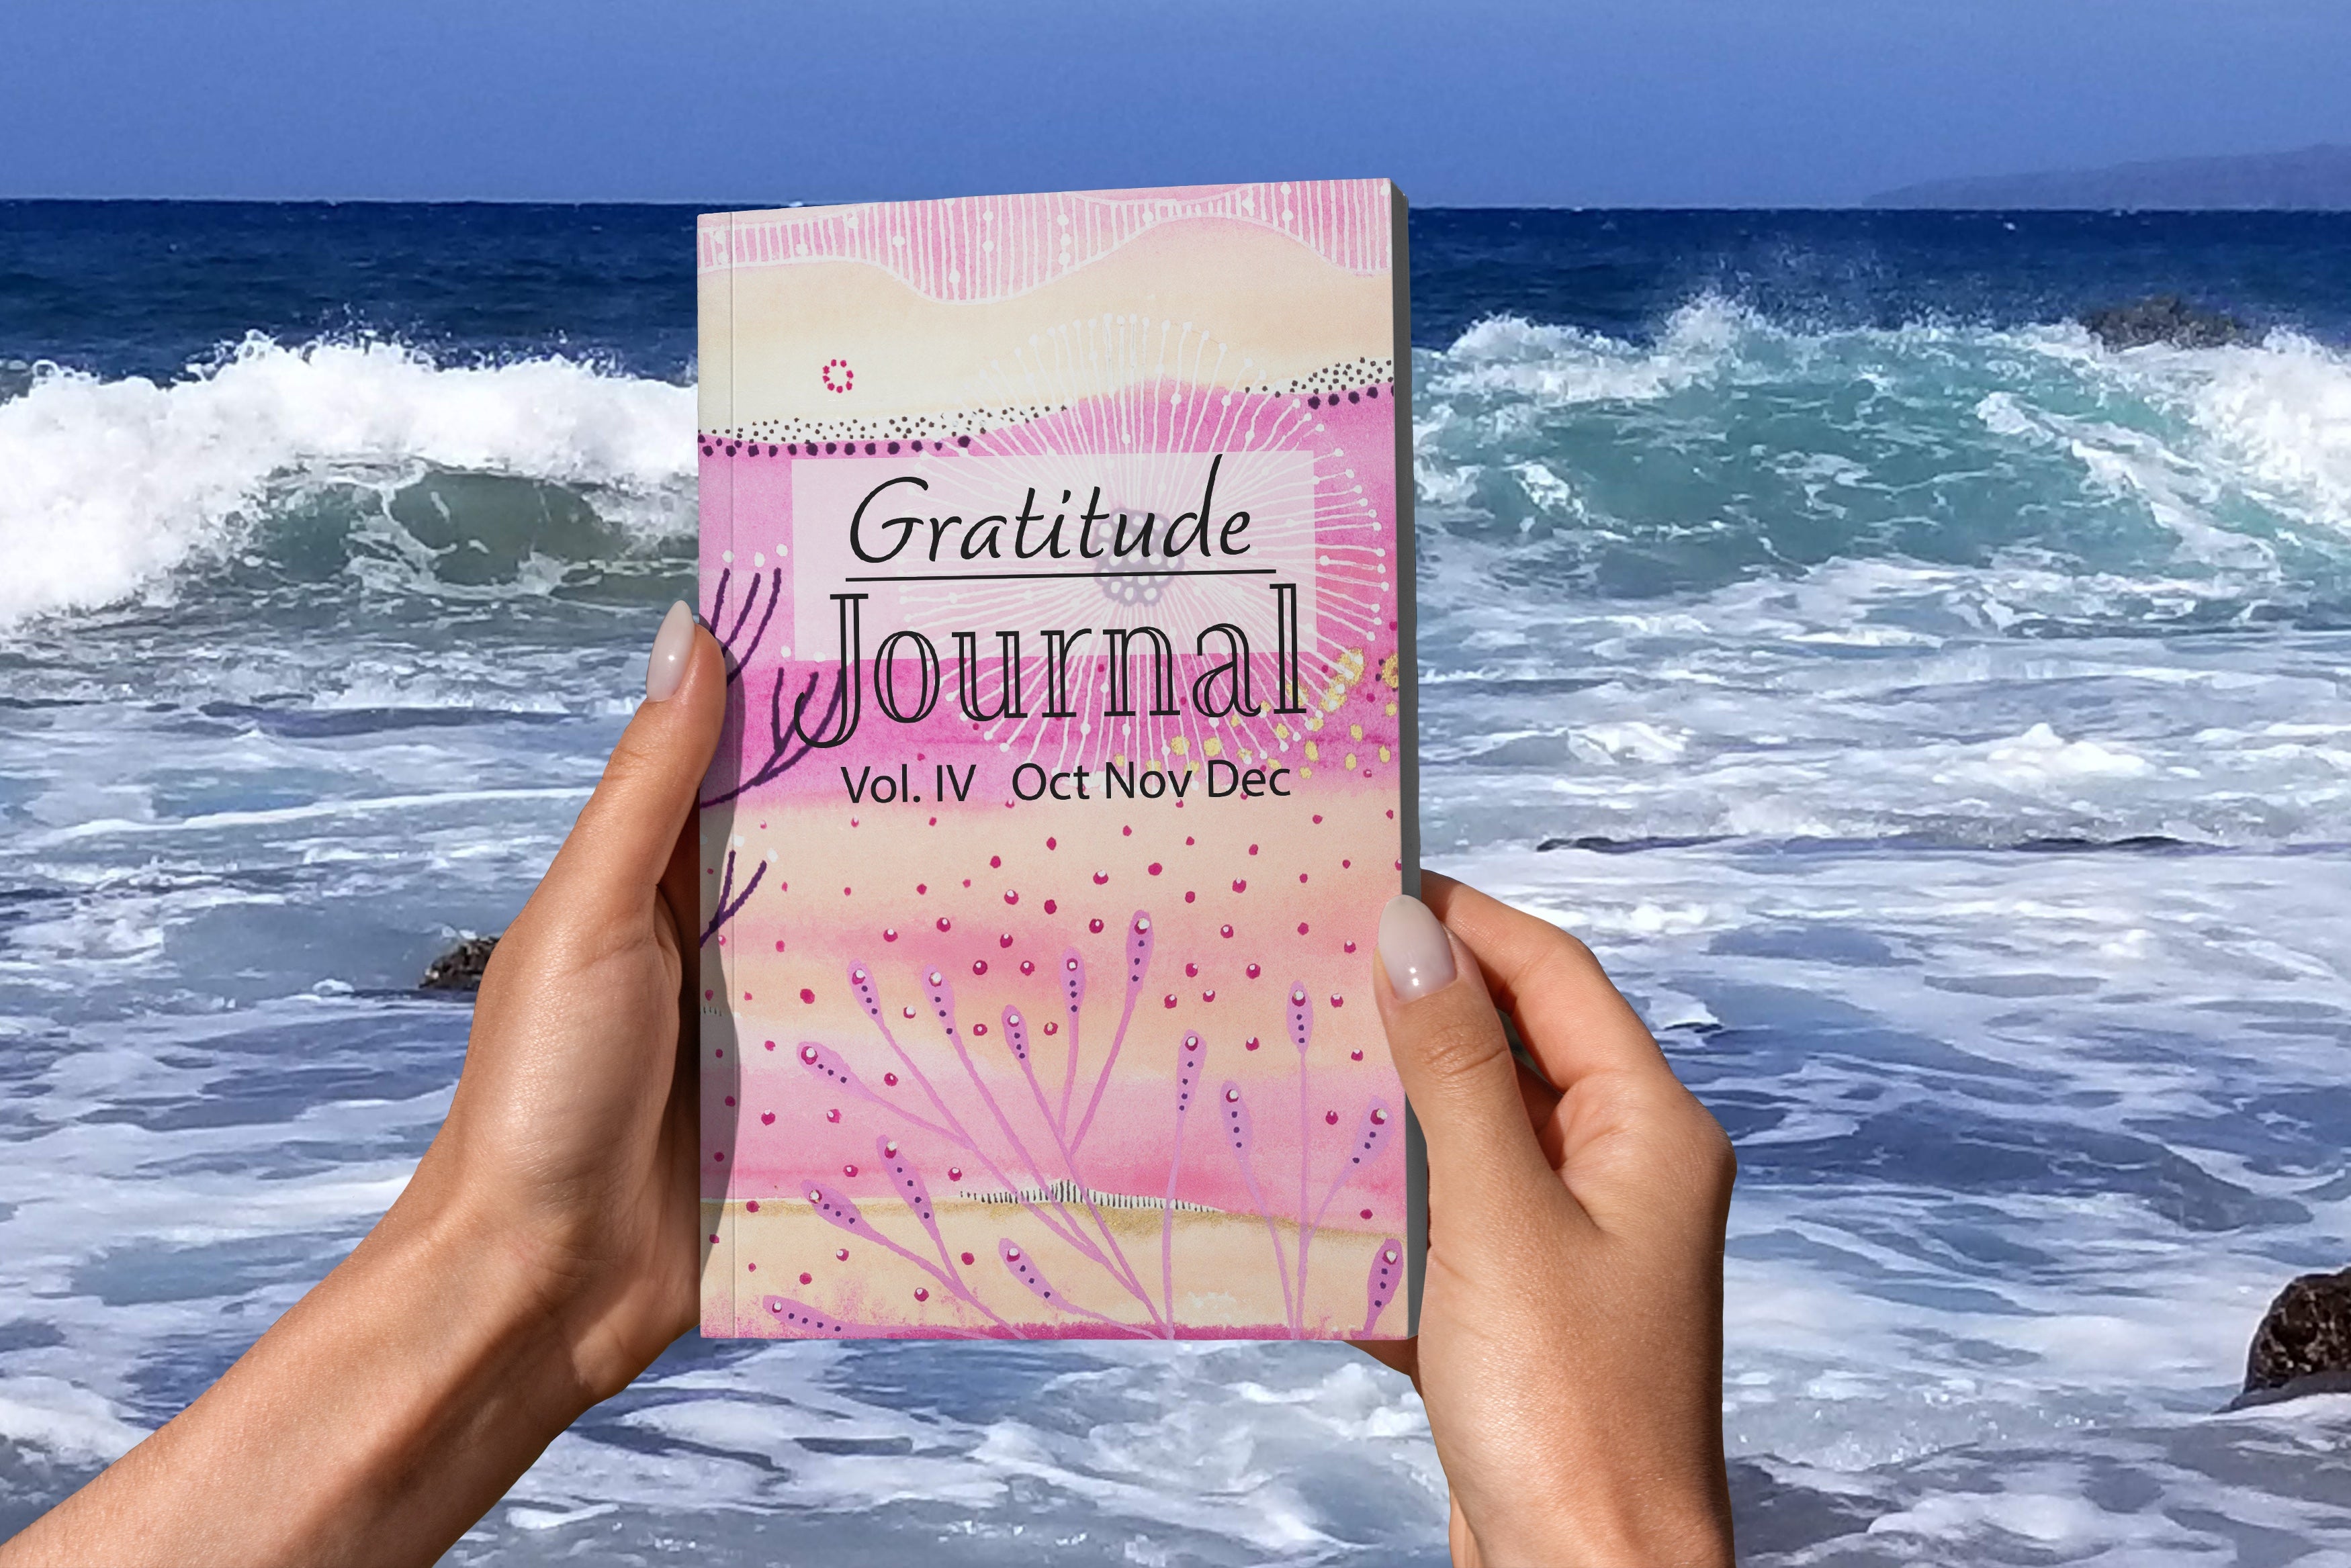 hands holding gratitude journal written by joanne grant.  This gratitude journal is volume 4, October, November and December.  The hands are holding the gratitude journal in front of waves crashing.